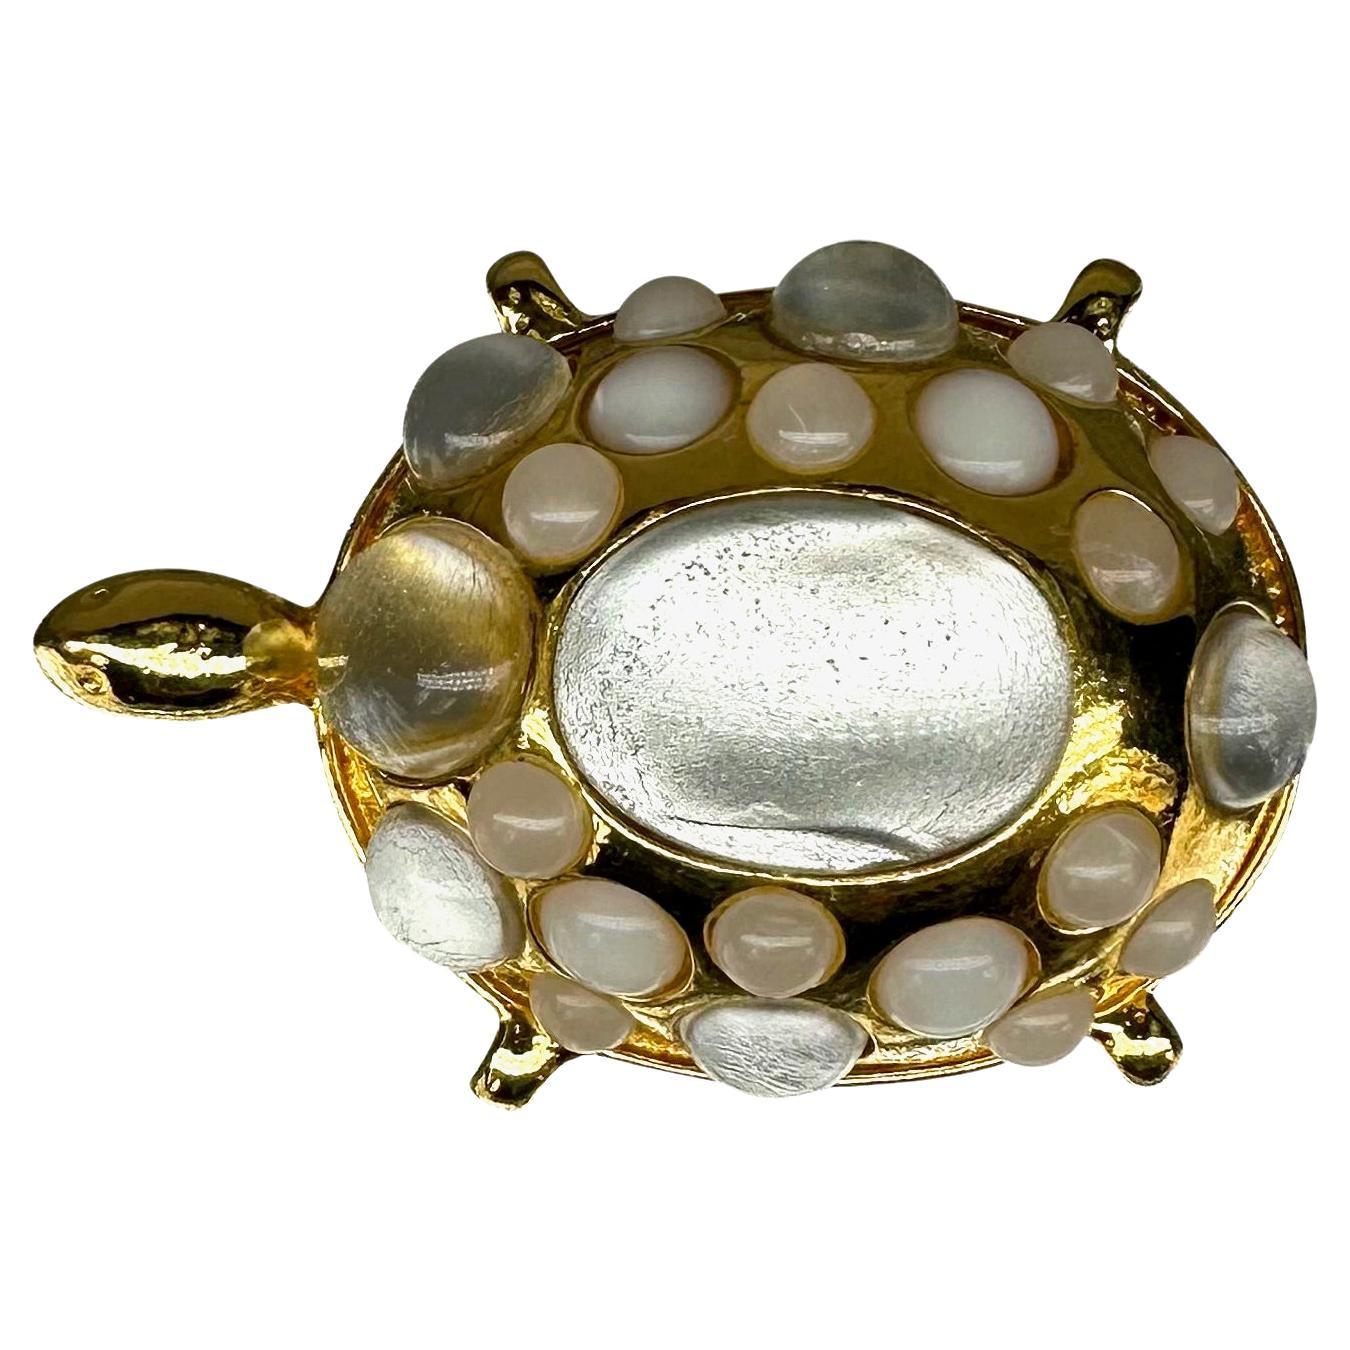 Presenting a fabulous gold-tone Valentino Garavani Couture costume turtle brooch. From the 1990s, this beautiful turtle brooch is made complete with faux opal cabochon stones on the shell. The perfect vintage couture touch to any outfit, this